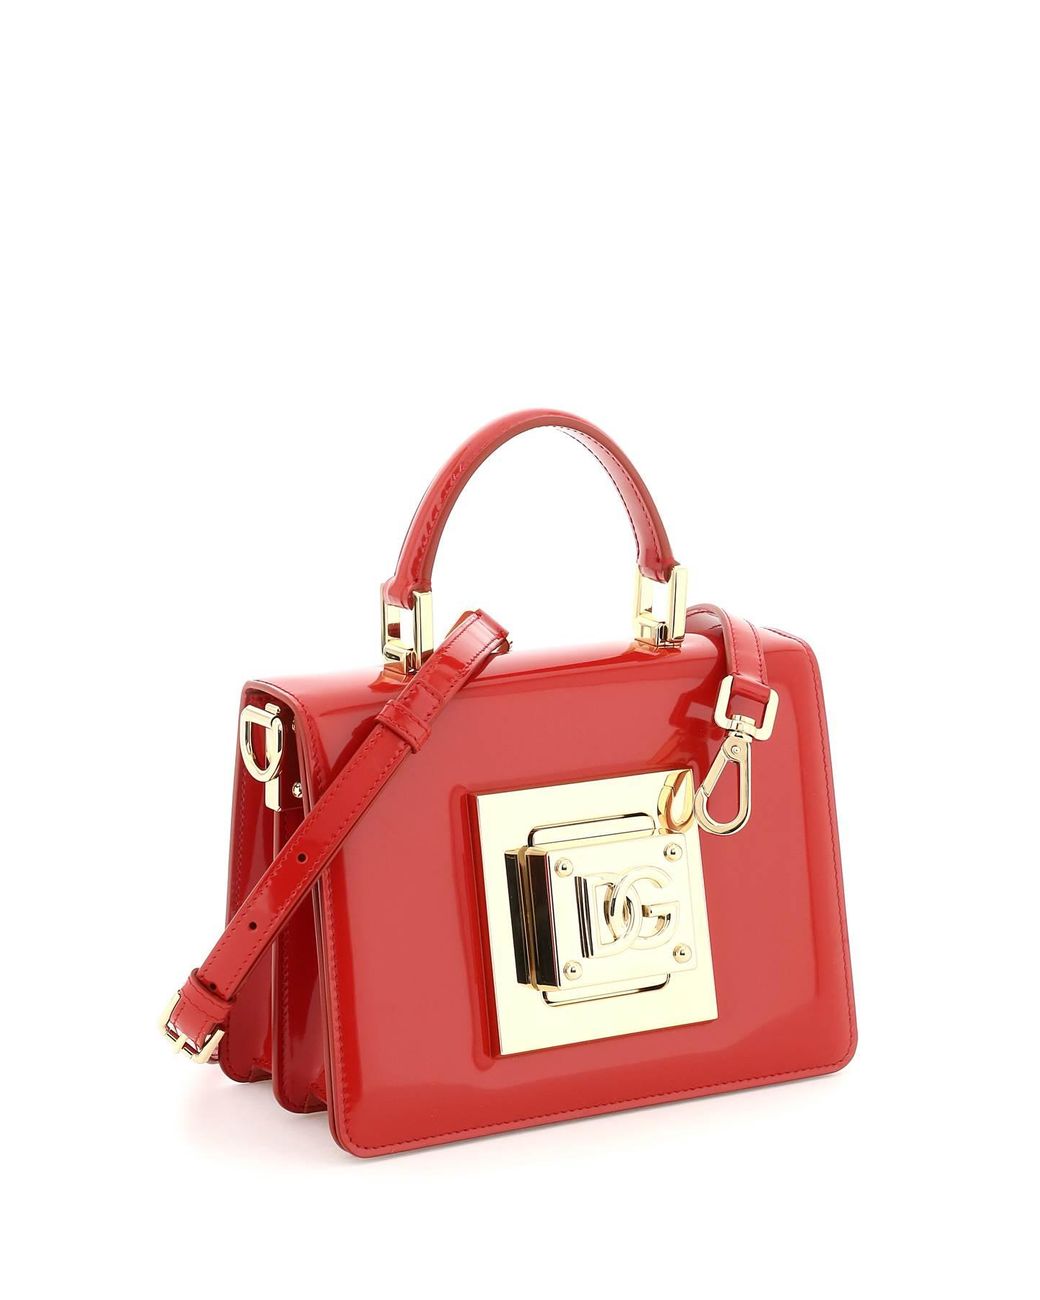 Dolce & Gabbana Patent Leather Top Hadle Bag in Red | Lyst